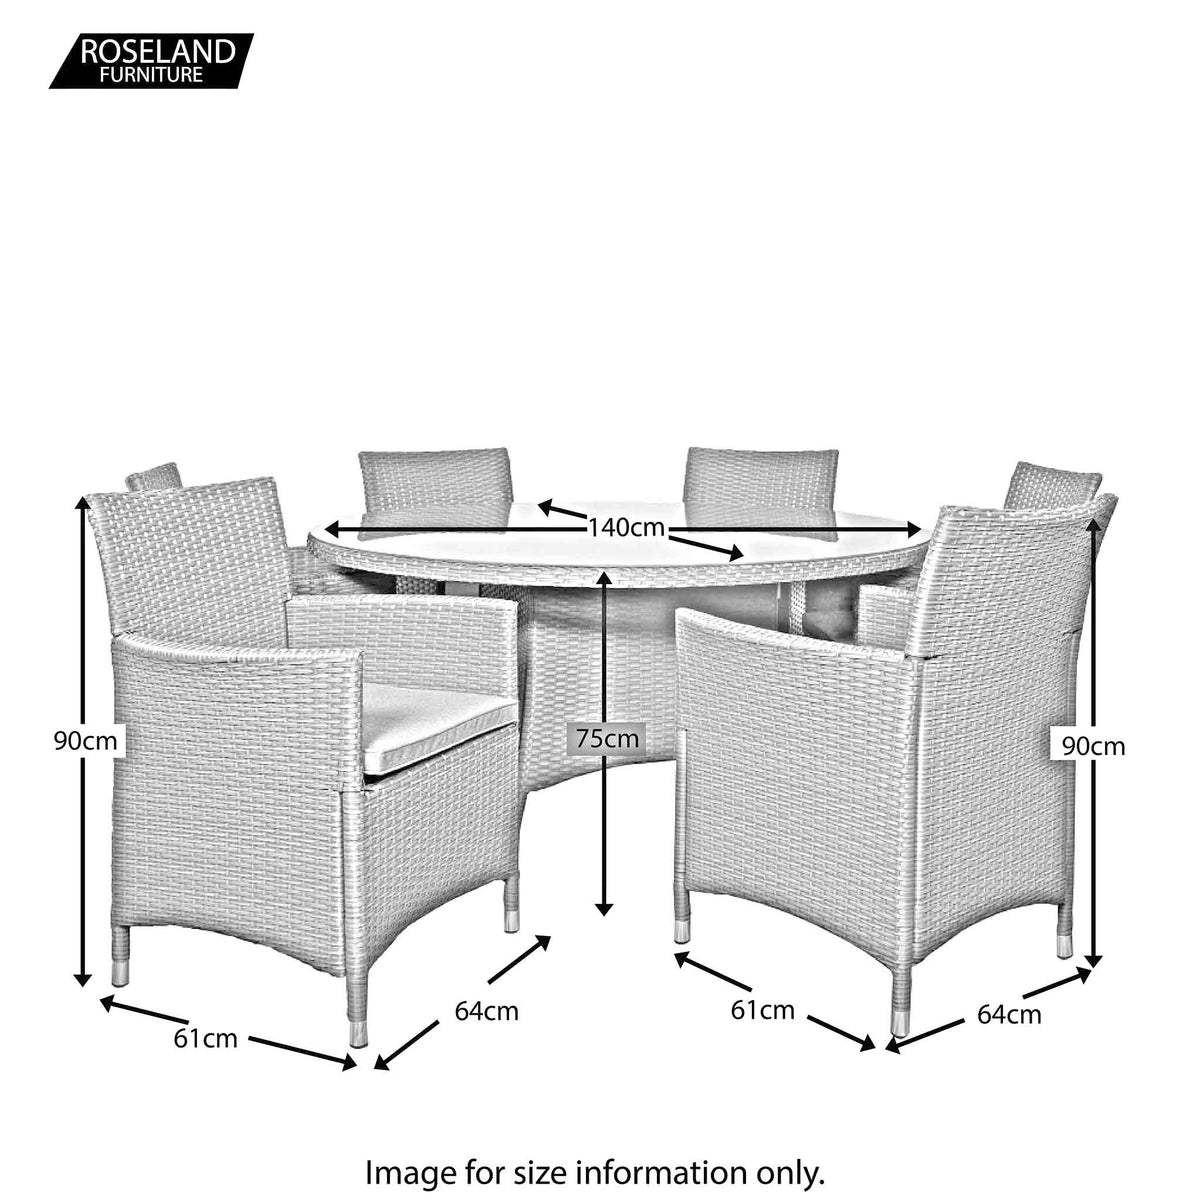 Vada 140cm 6 Seat Rattan Round Dining Set - Size Guide